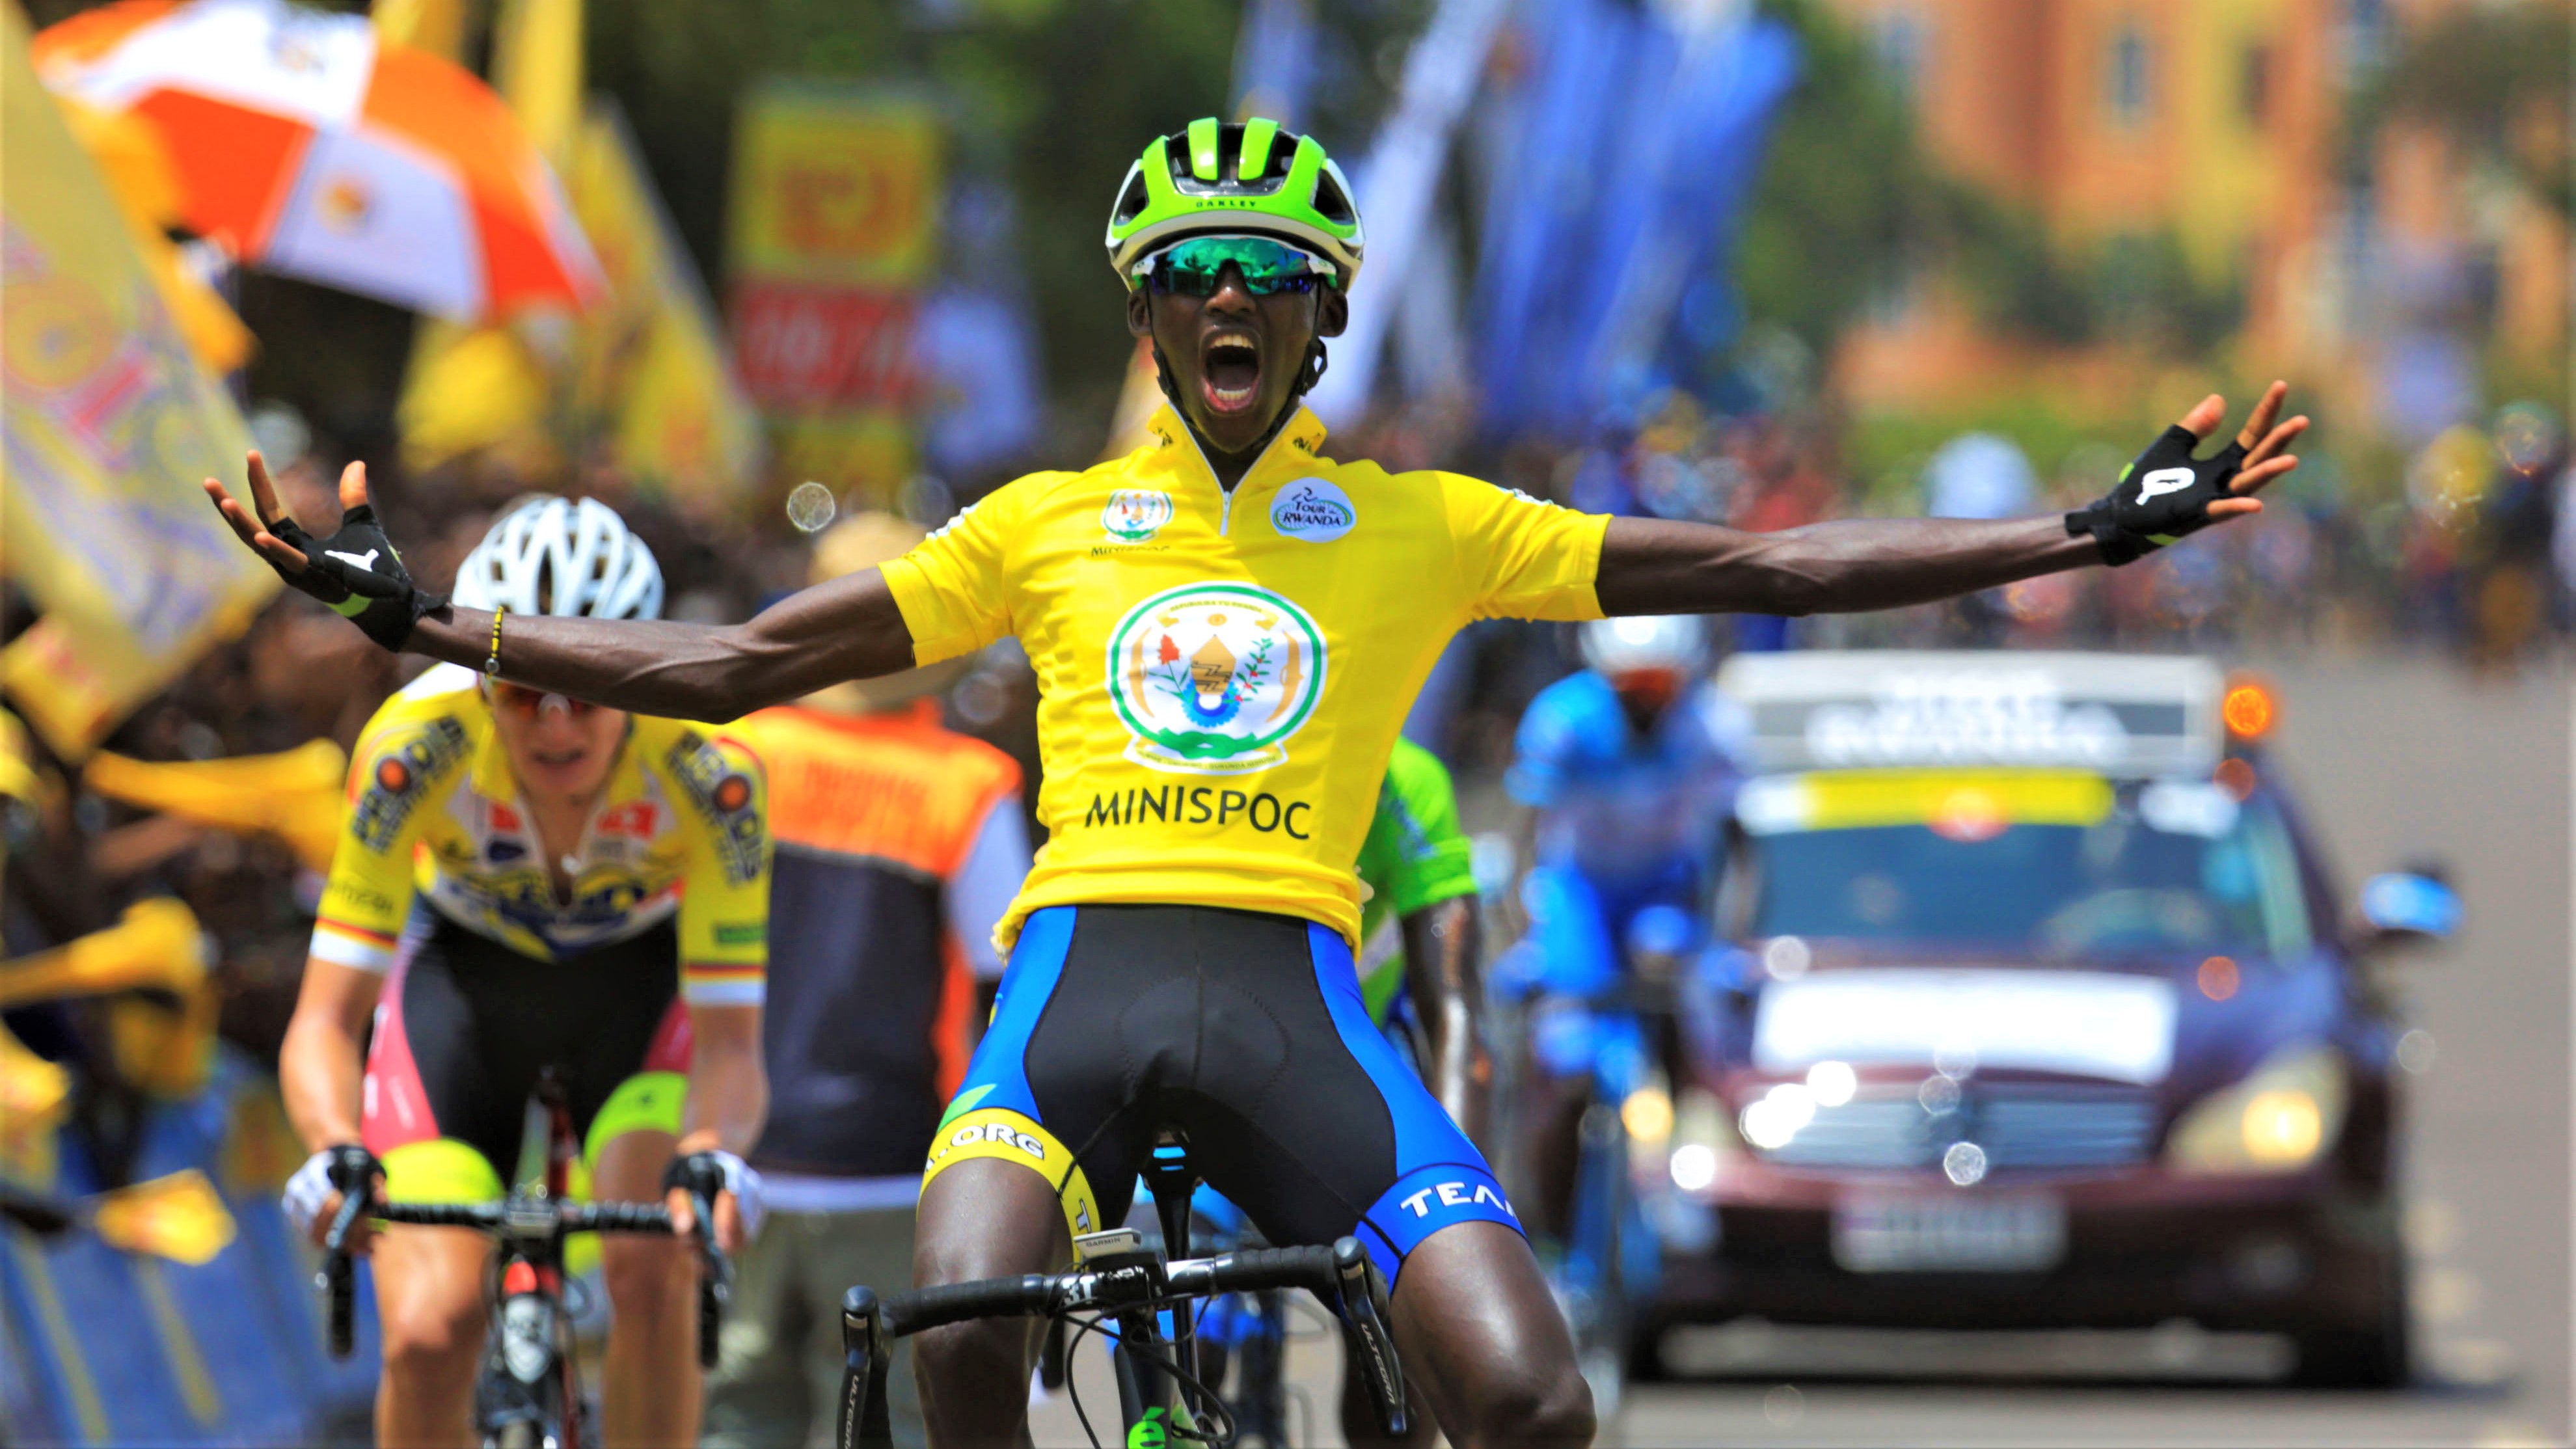 Samuel Mugisha, seen here celebrating after crossing the line outside Kigali Stadium in Nyamirambo to win the 2018 Tour du Rwanda, will captain Team Rwanda at this year's edition. The 22-year old the fourth and last Rwandan to win Tour du Rwanda as a UCI 2.2 race before its upgrade to 2.1 category last year. The 2020 Tour du Rwanda has attracted 16 teams from across the world. Photo: 